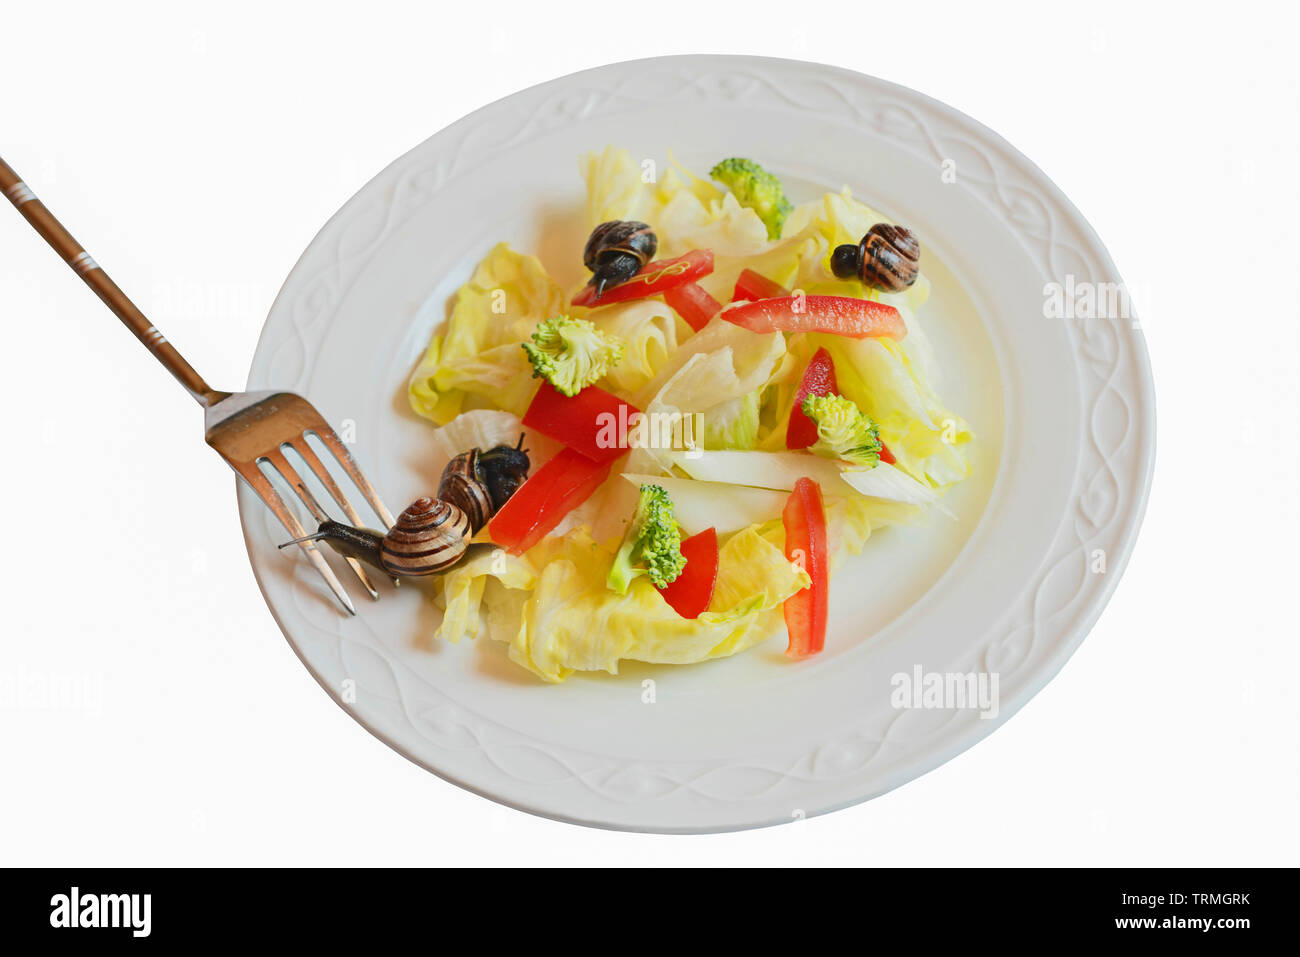 Plate of salad against white background with four live brown lipped snails, Cepaea nemoralis,, a parody on the concept of veganism, food fads recipes. Stock Photo